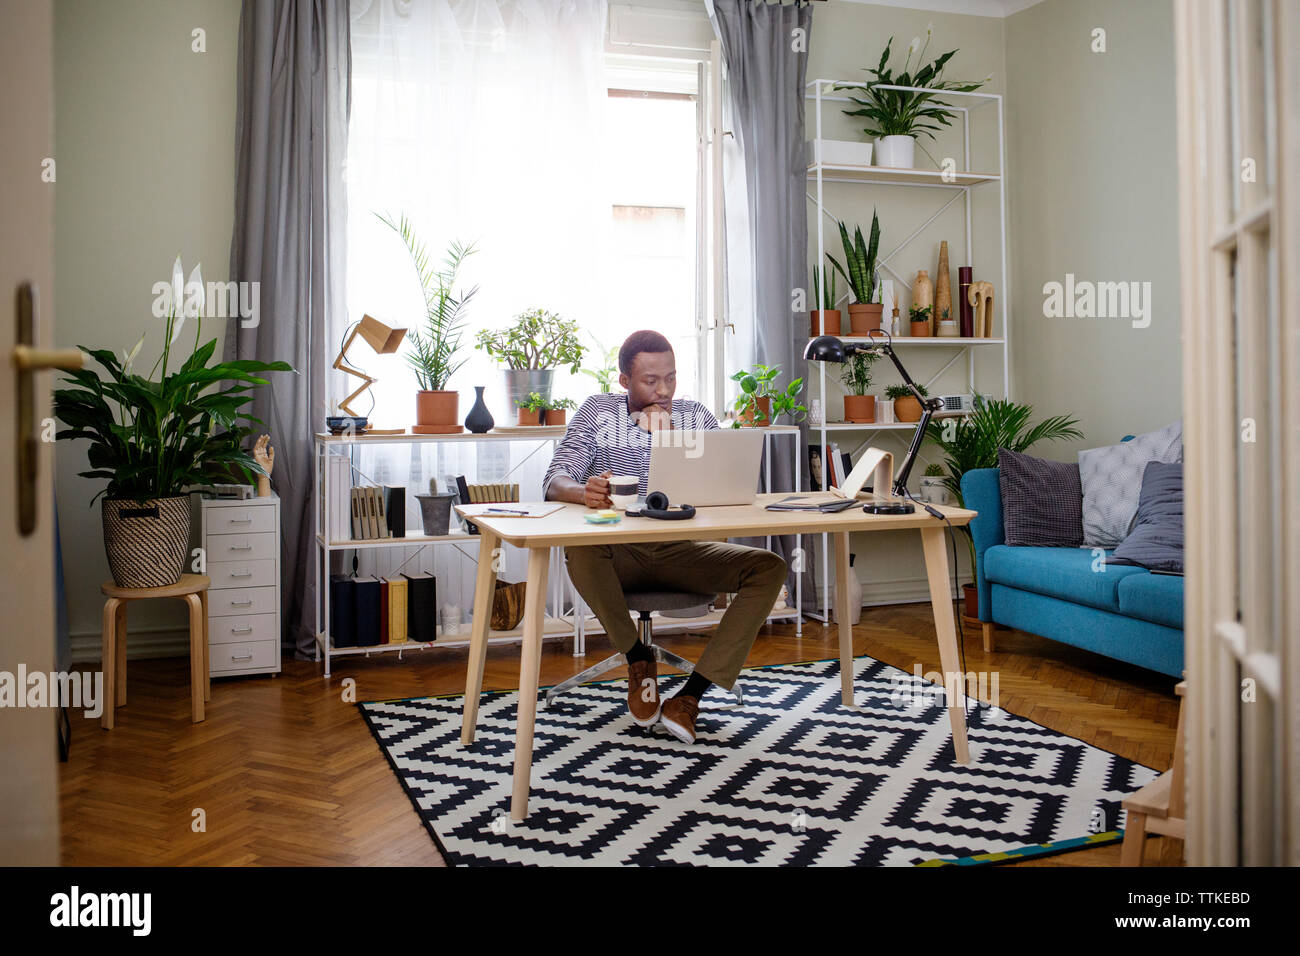 Man working on laptop at home office Stock Photo